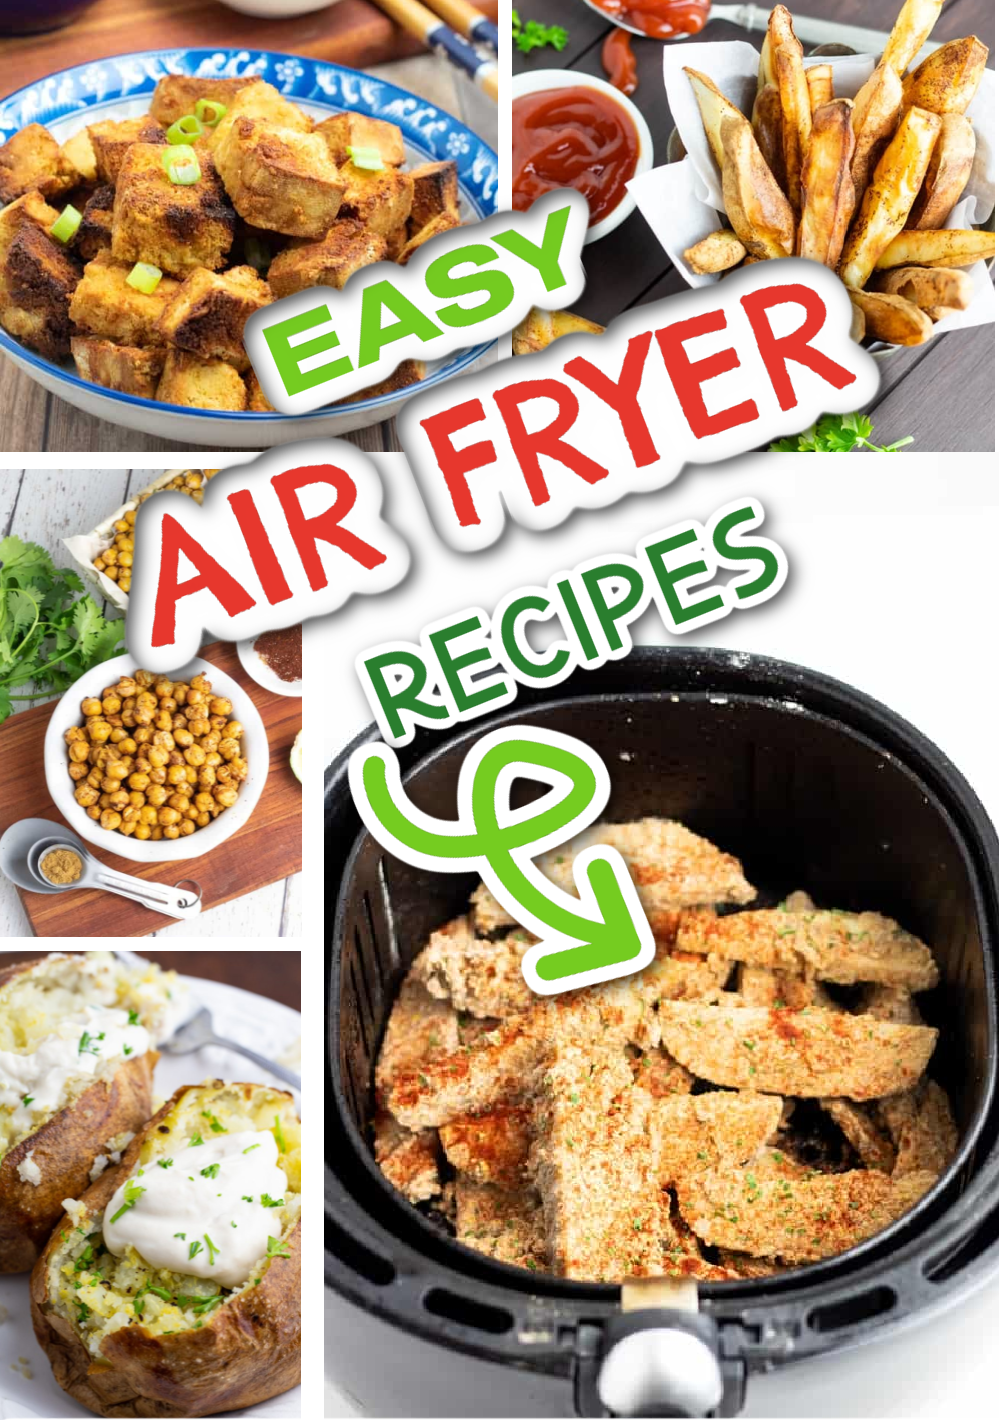 Quick and Simple Air Fryer Recipes For The Kids